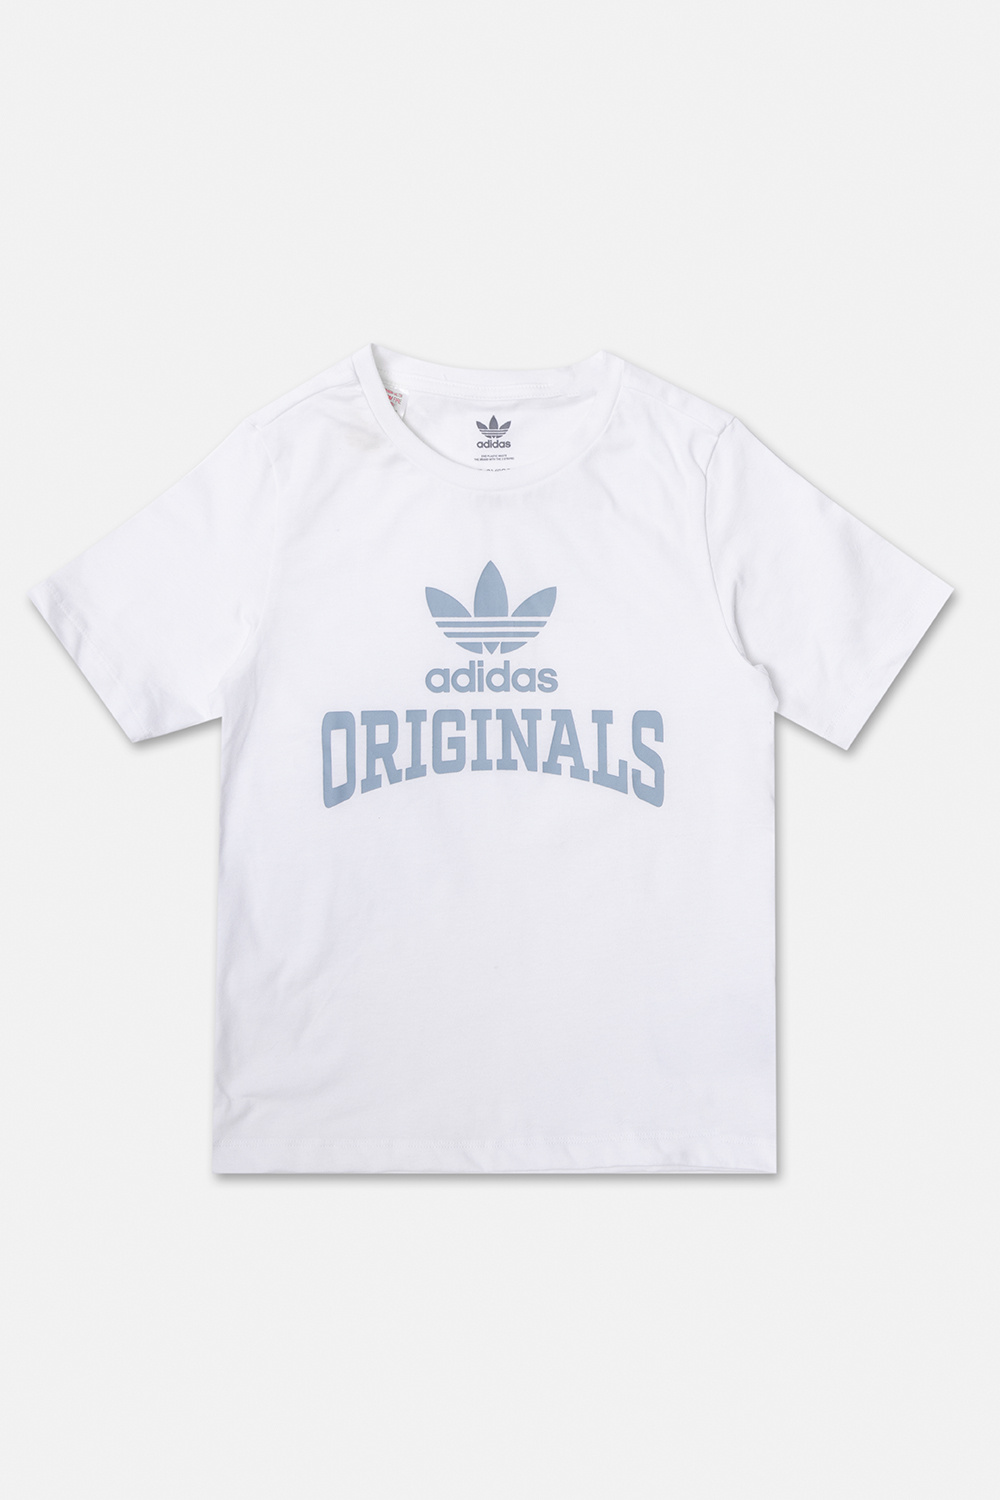 ADIDAS Kids adidas confidential tee size guide women